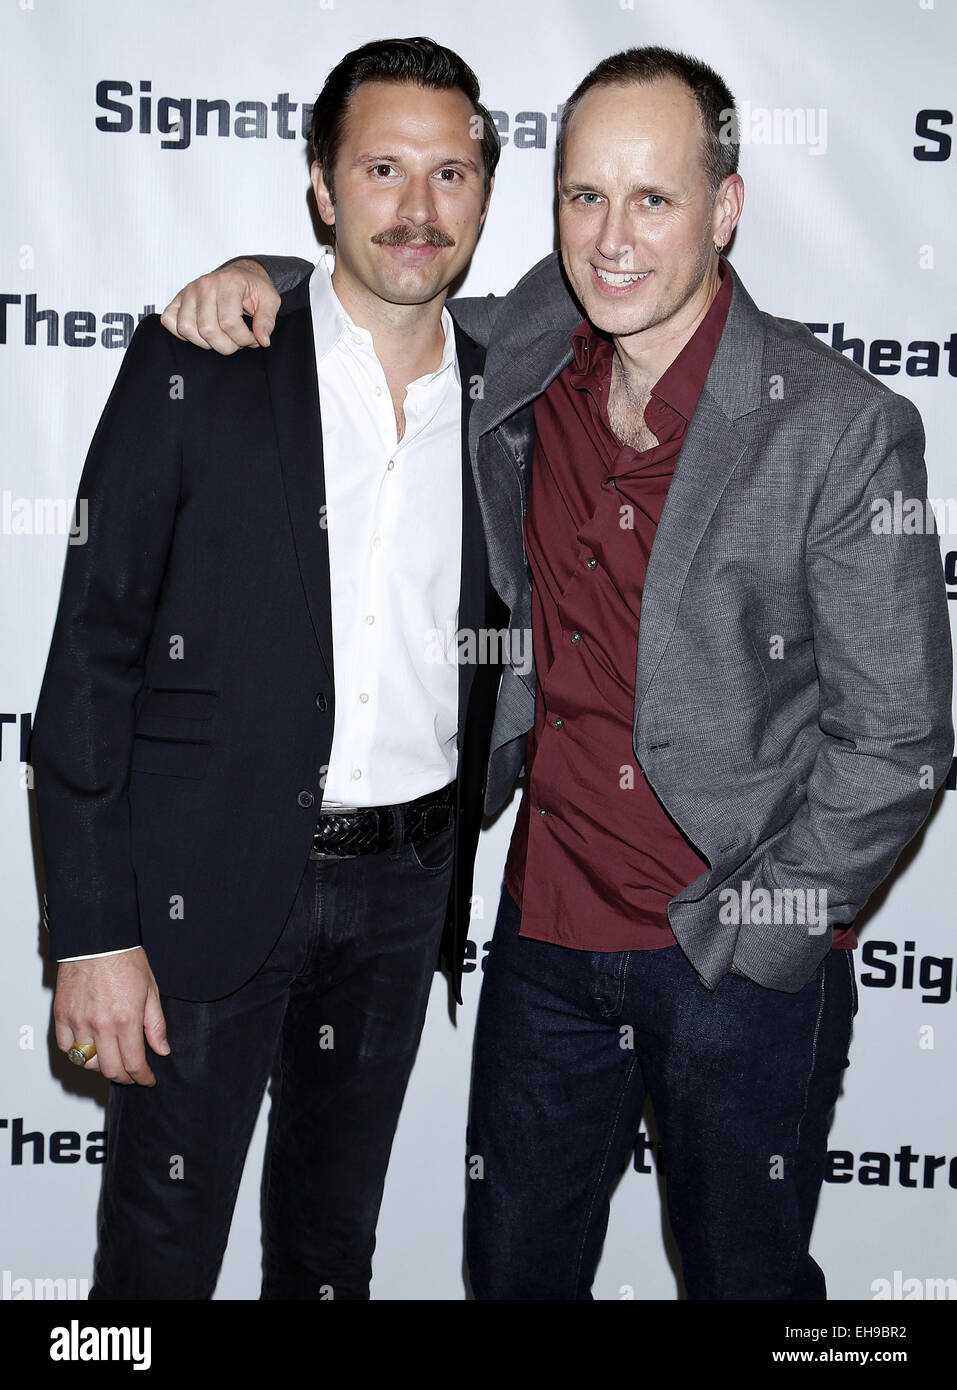 Opening night party for The Wayside Motor Inn at the Signature Theatre - Arrivals. Featuring: Quincy Dunn-Baker,Kelly AuCoin Where: New York, New York, United States When: 05 Sep 2014 Stock Photo